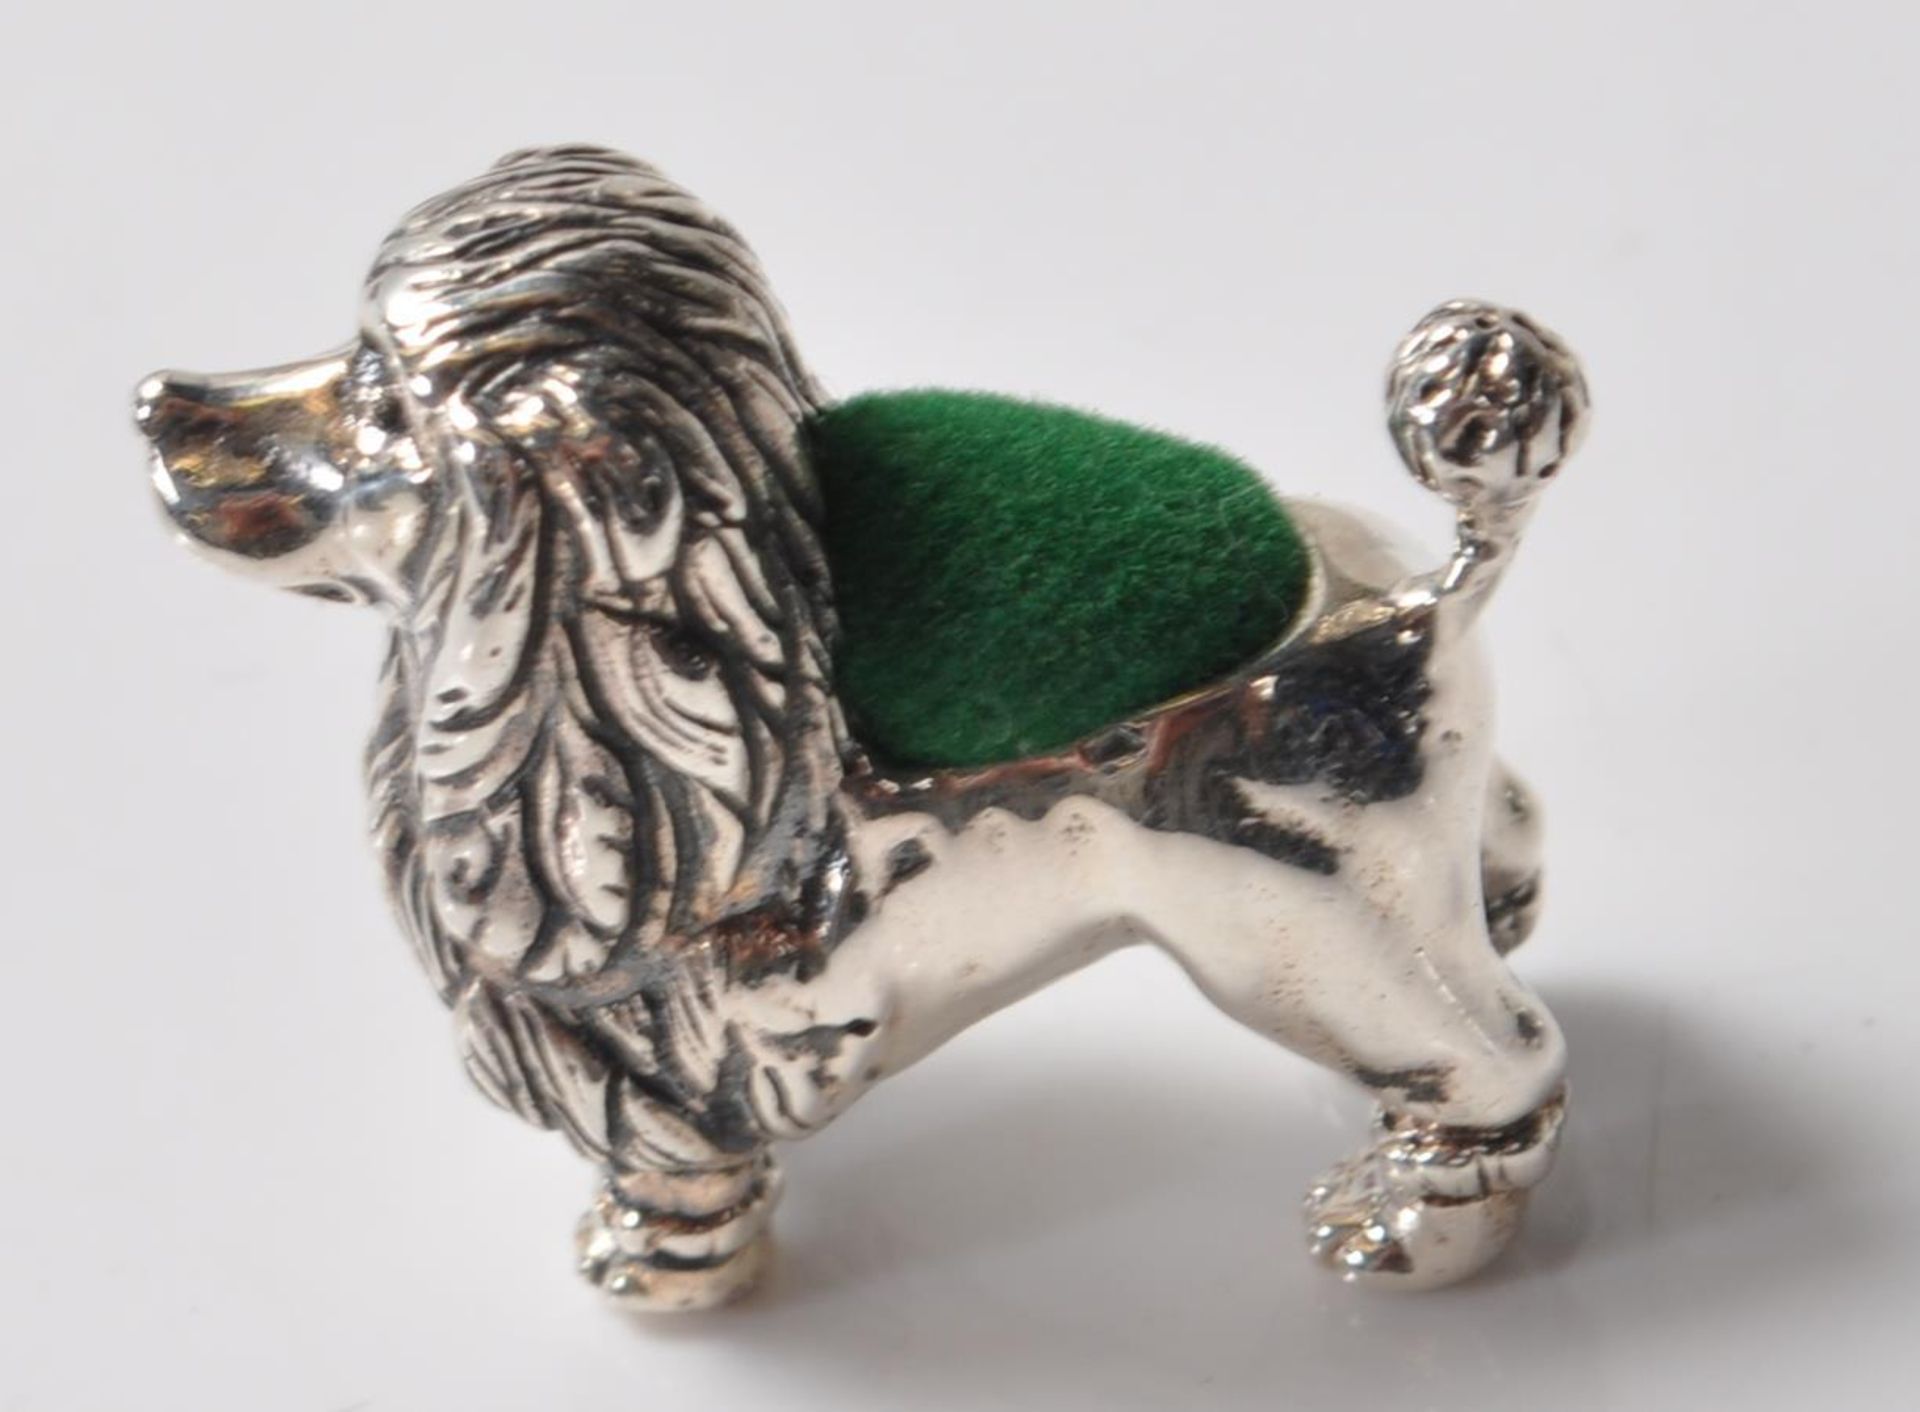 STAMPED 925 SILVER PIN CUSHION IN THE FORM OF A POODLE. - Image 2 of 5